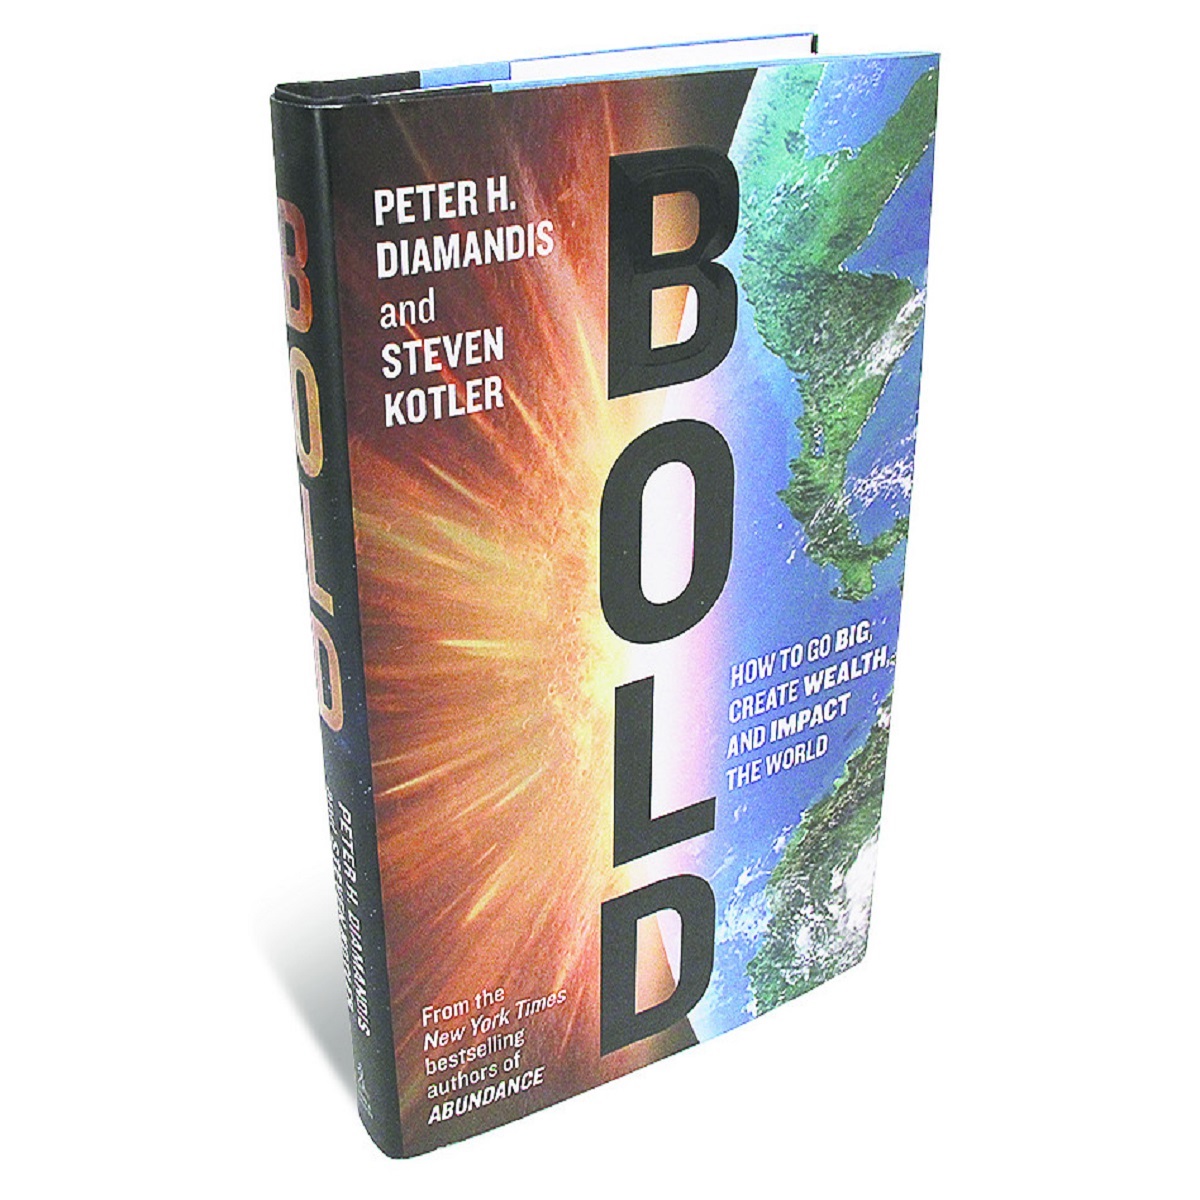 https://www.tarbiyahbooksplus.com/shop/business-economics-law-and-finance/bold-by-peter-diamandis/